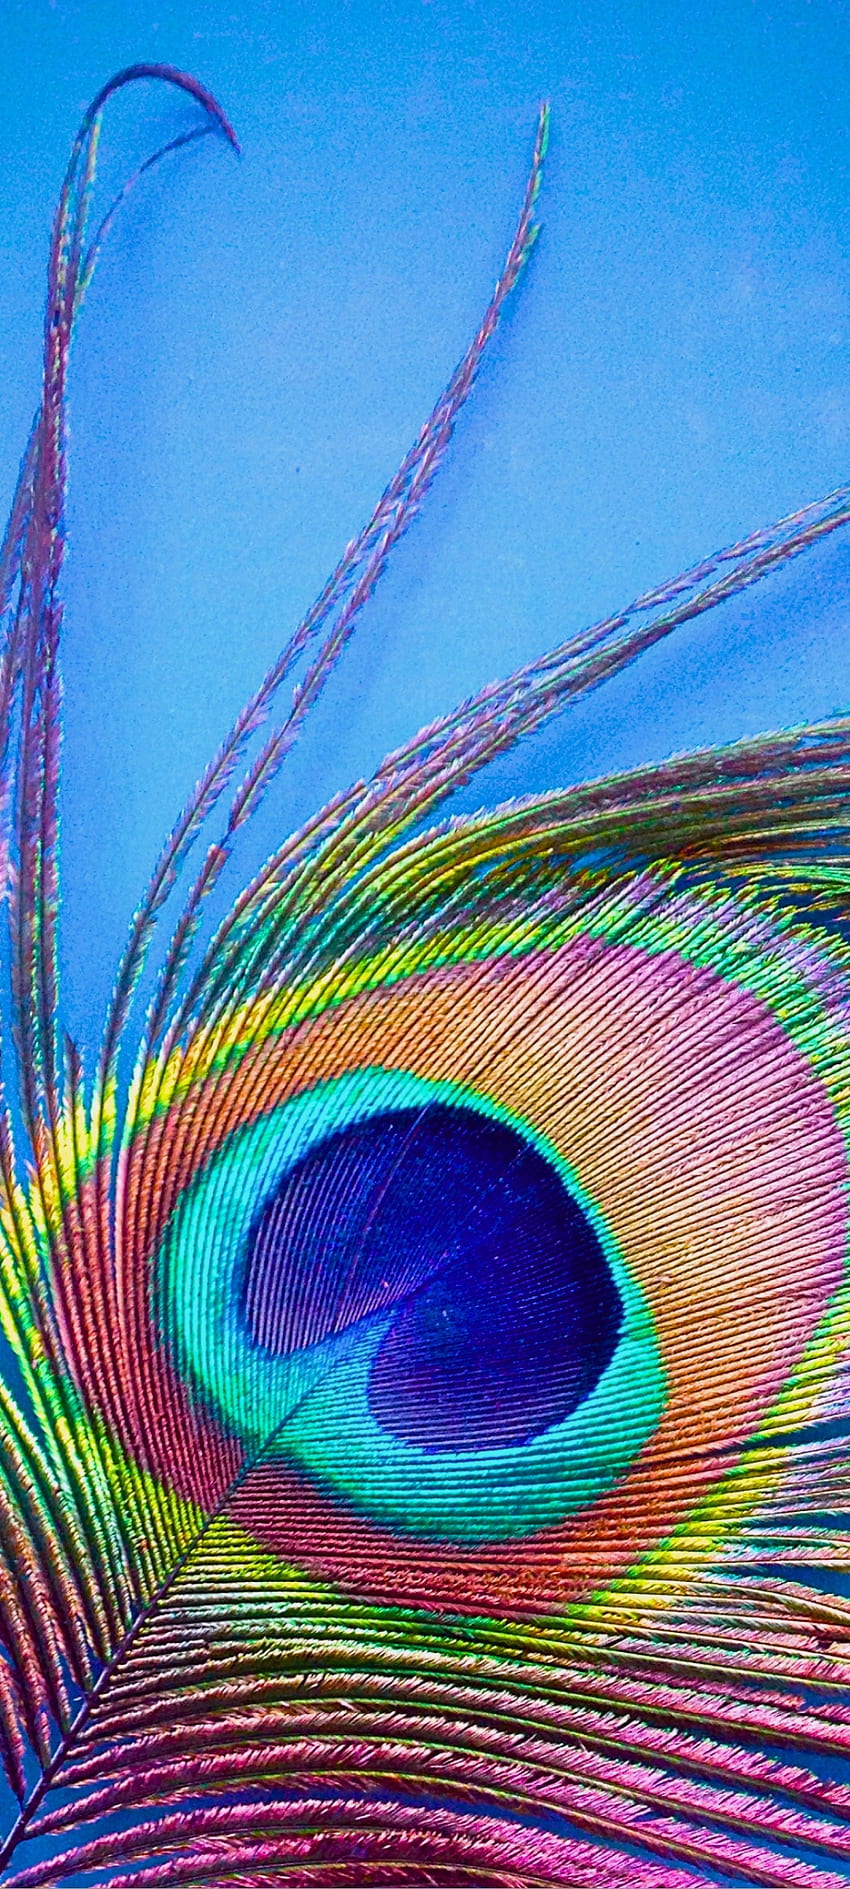 A Beautiful Peacock with Colorful Feathers Stock Image  Image of beautiful  blue 130401073